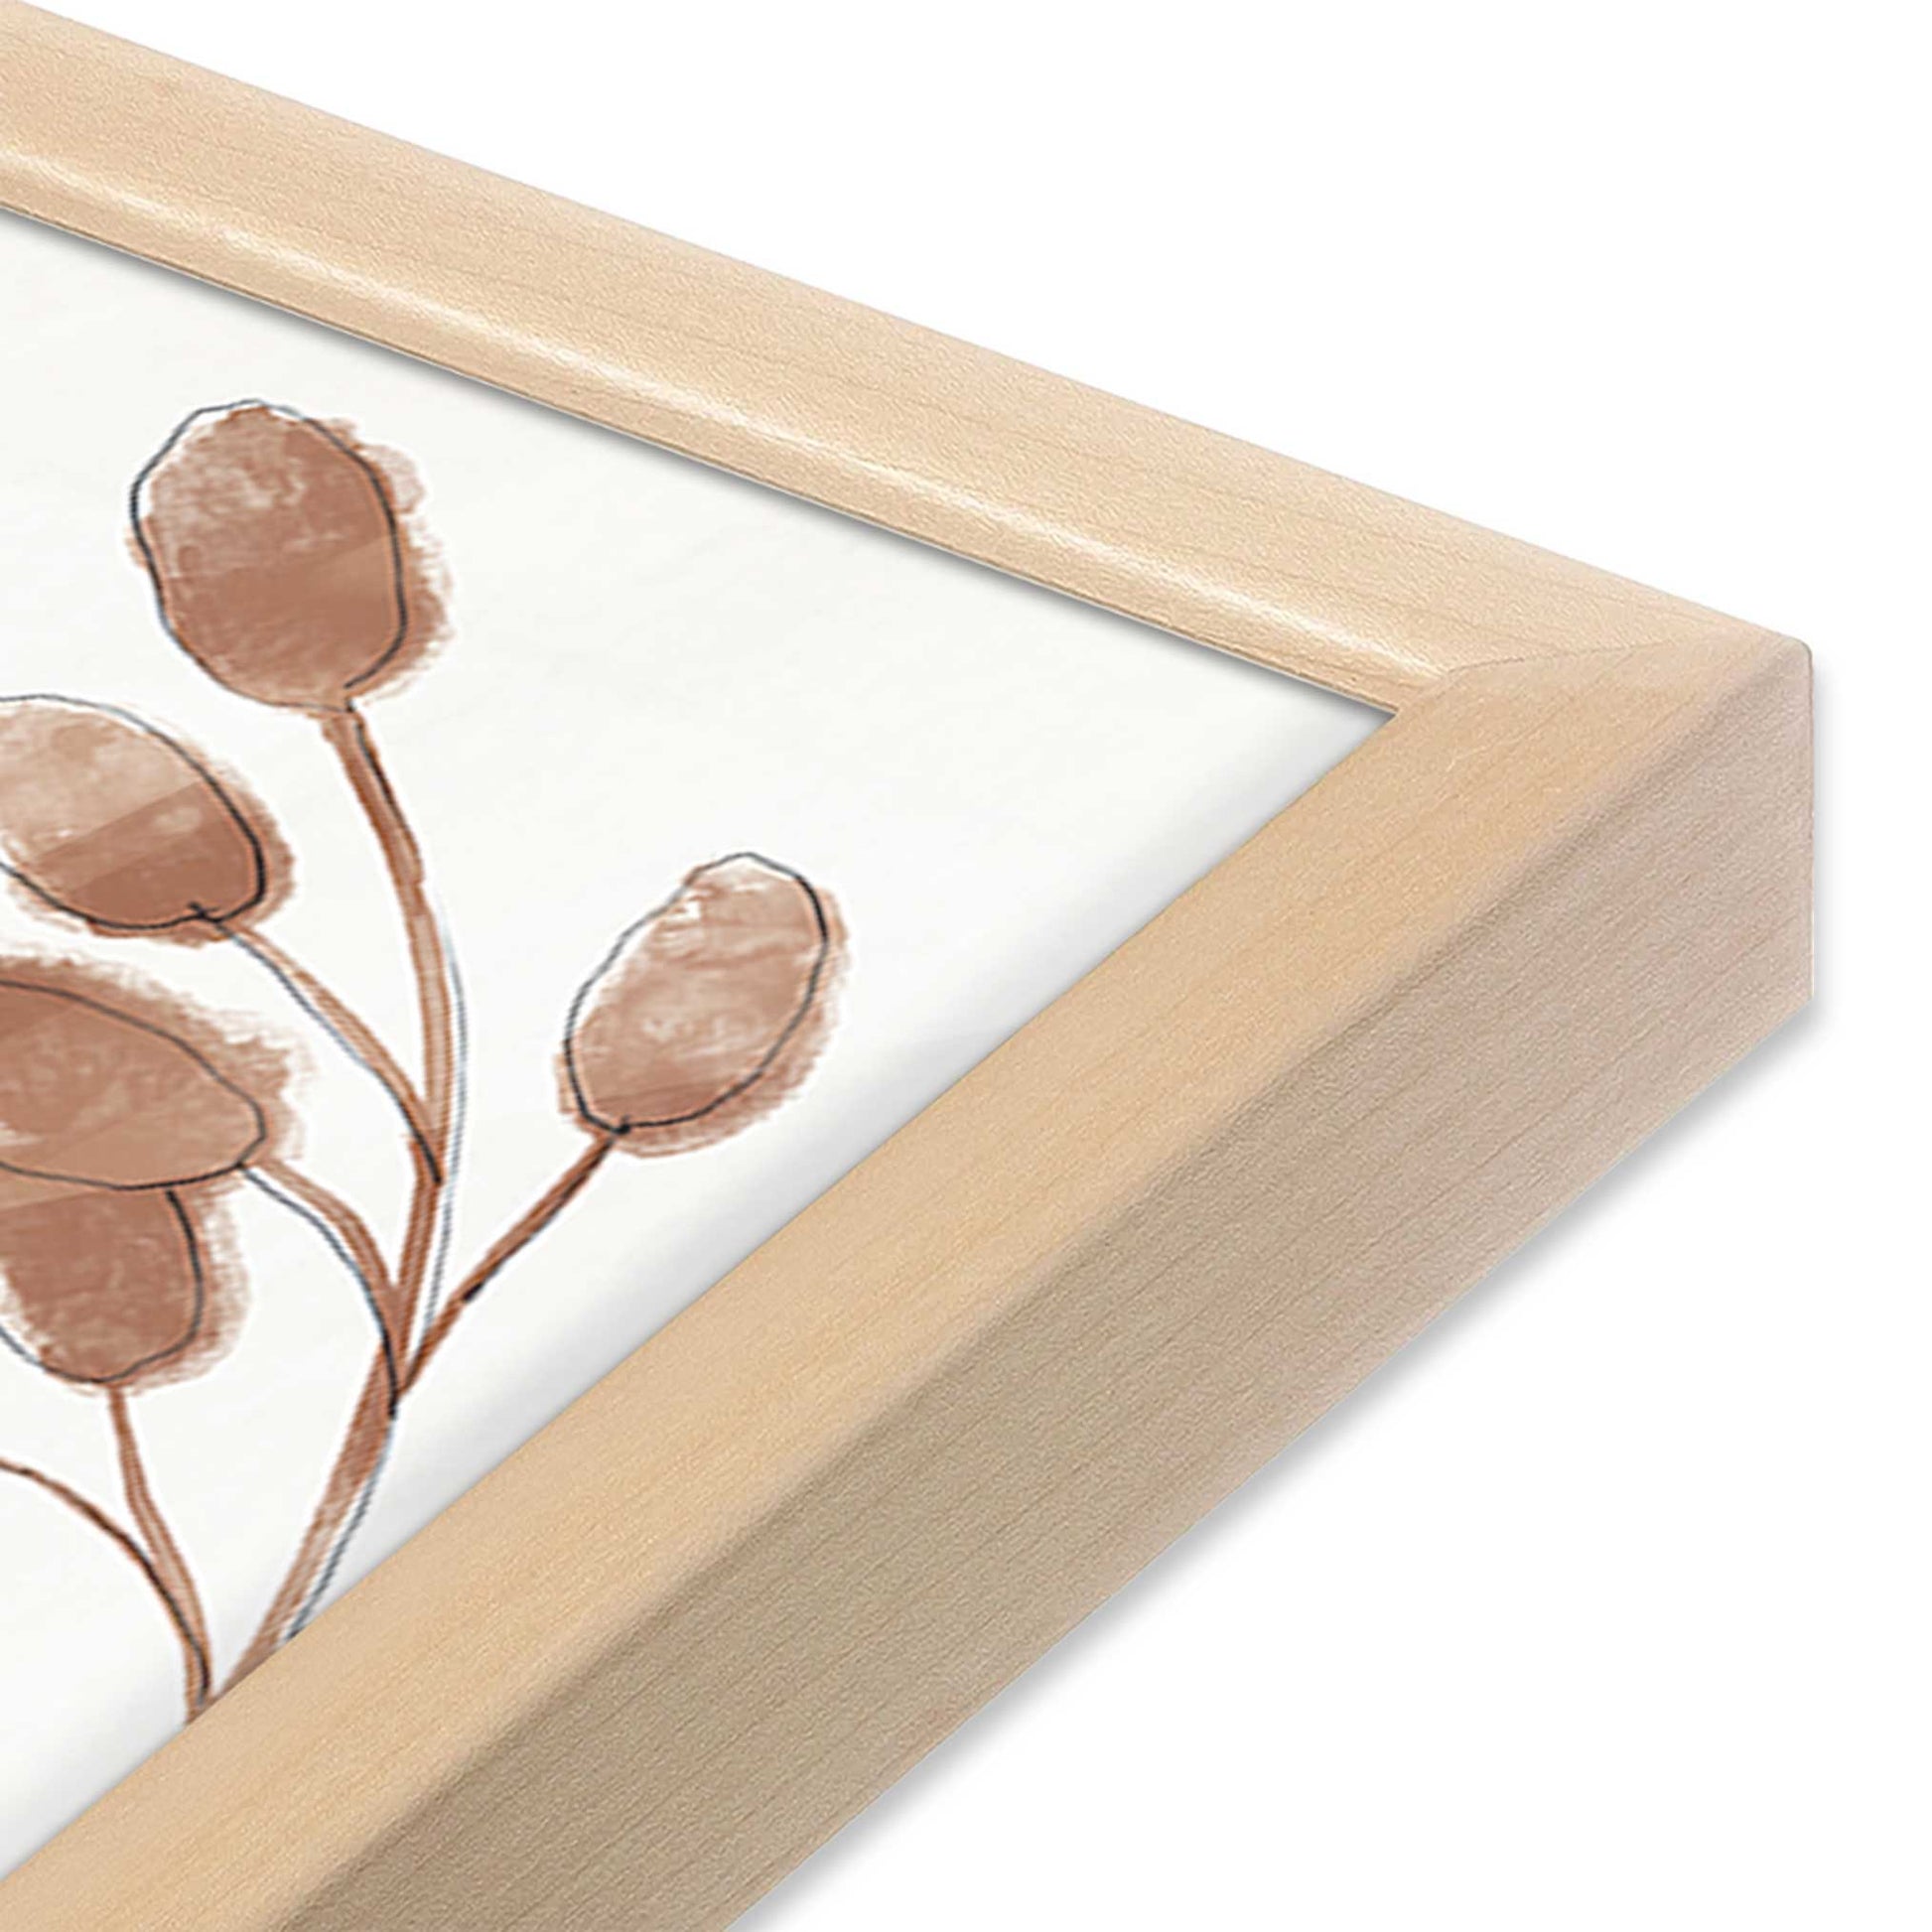 [Color:Raw Maple], Picture of art in a Raw Maple frame of the corner